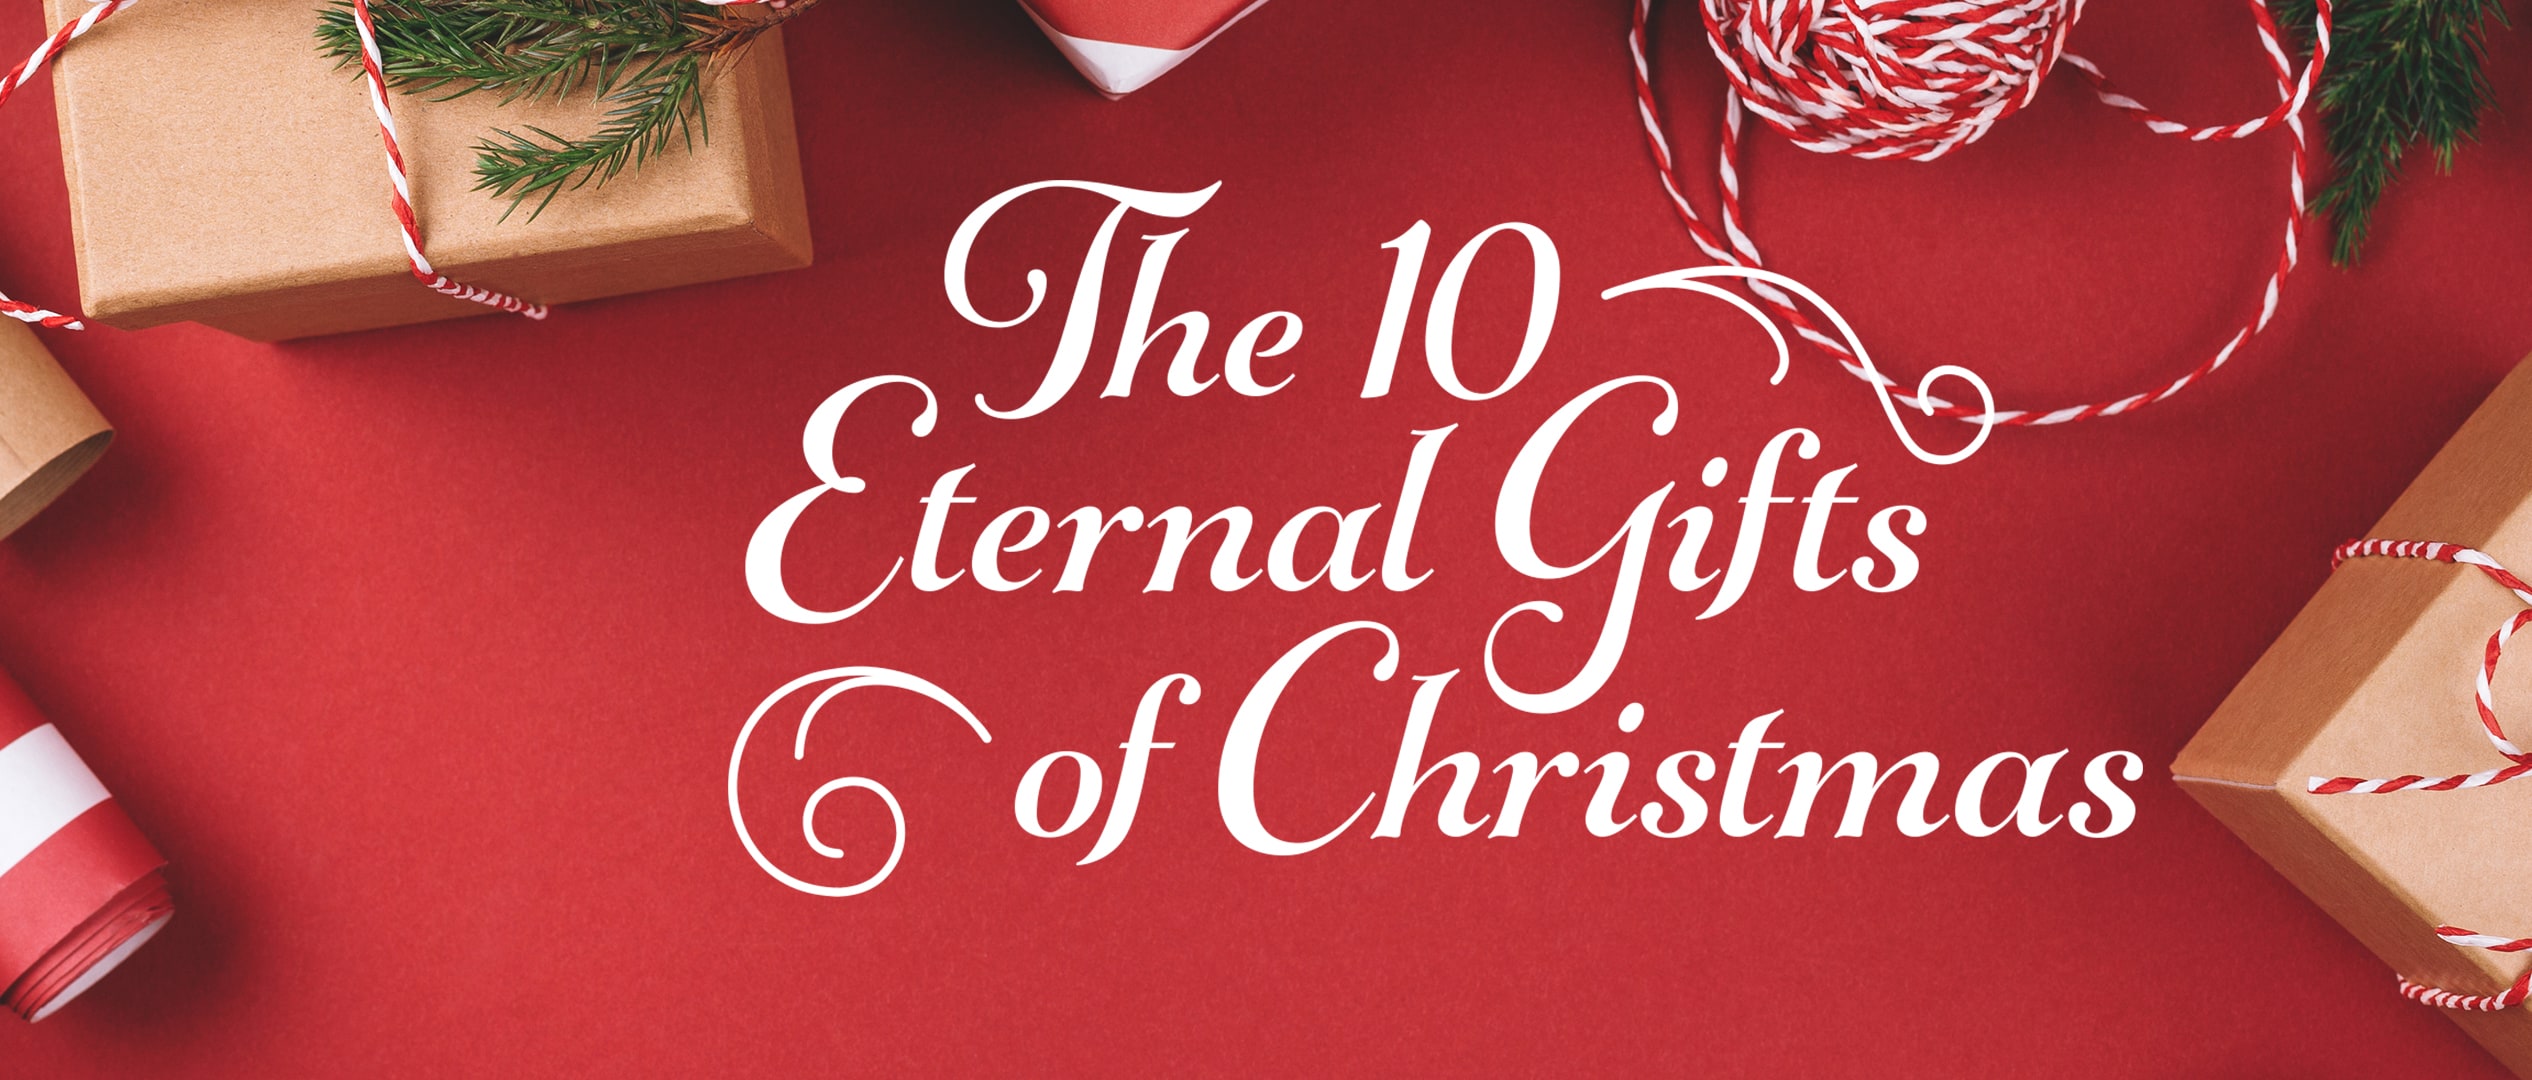 10 Eternal Gifts of Christmas